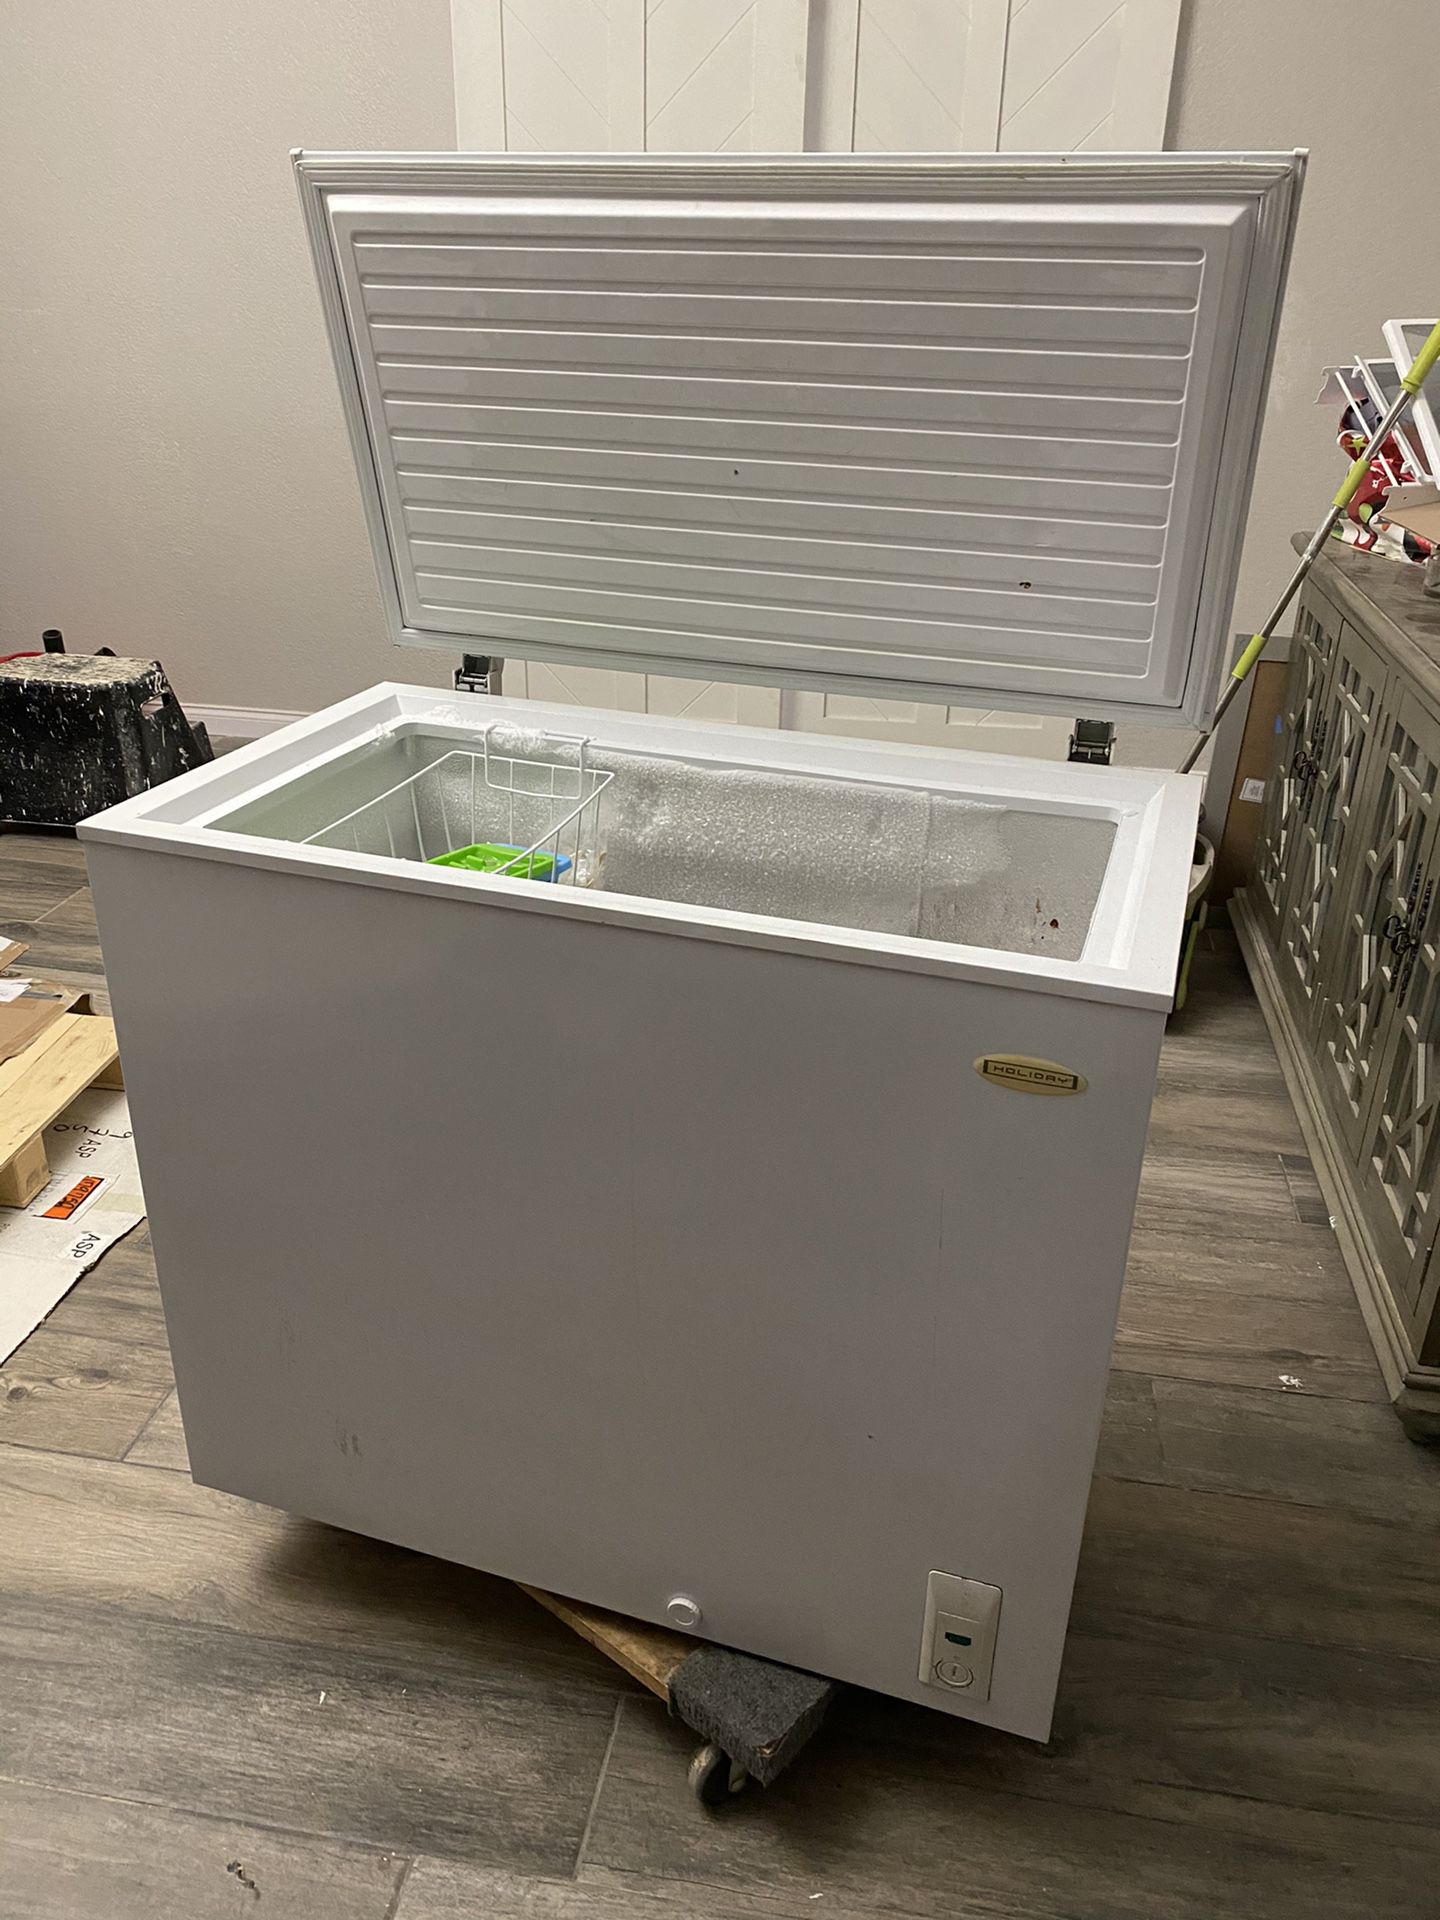 Holiday Chest Deep freezer 7 cubic ft . Works like new